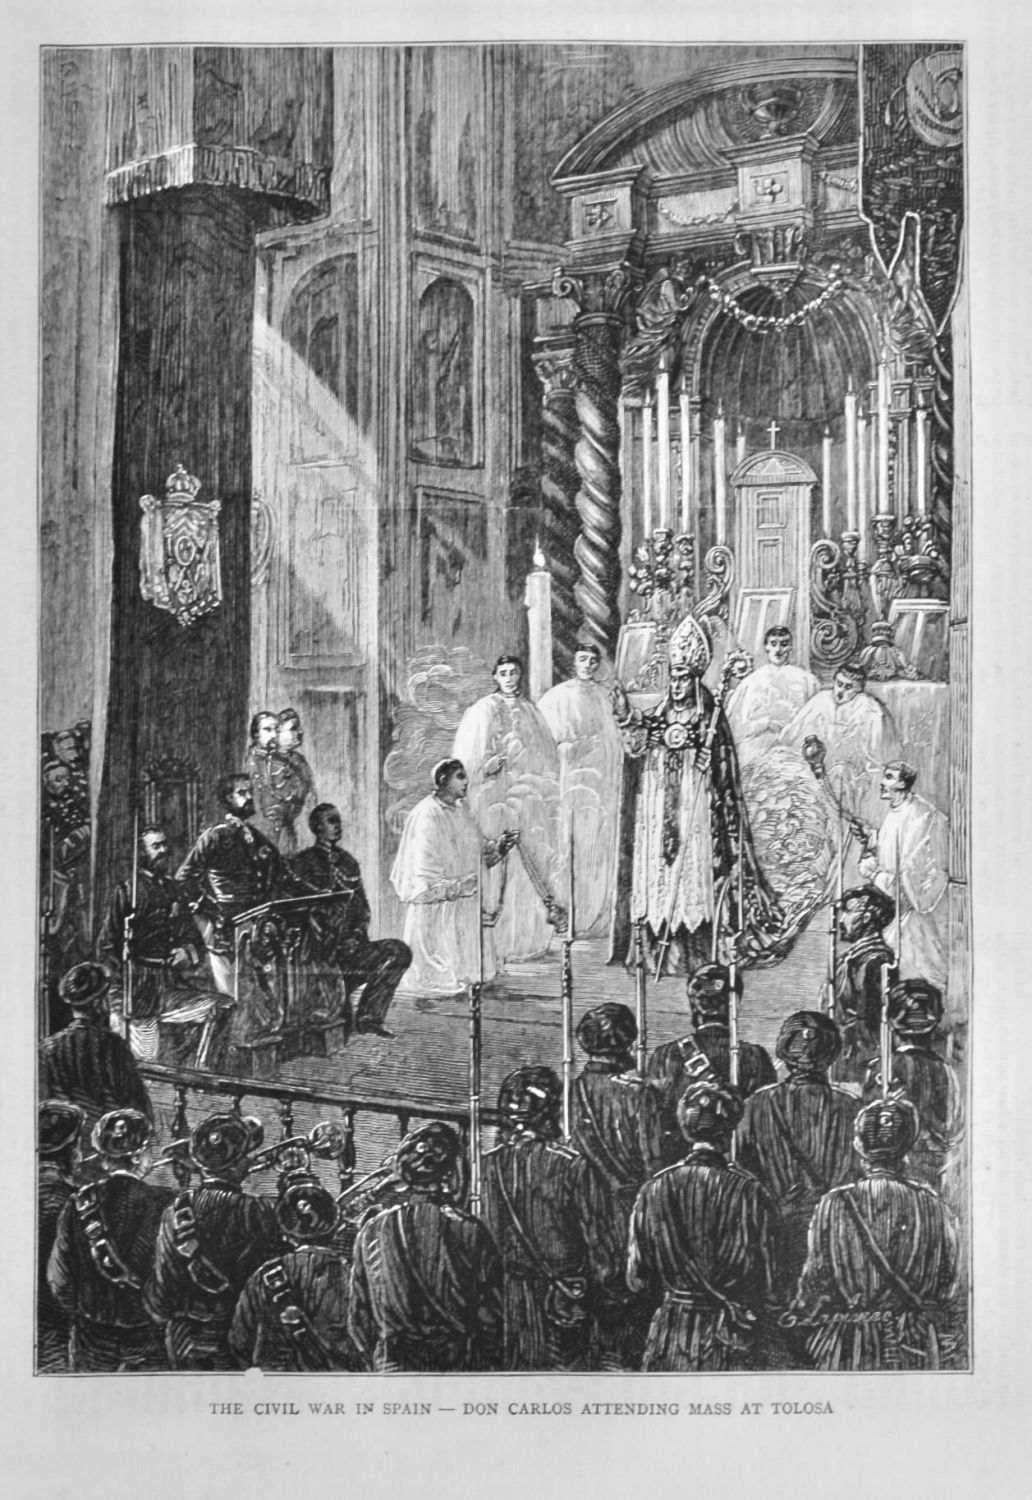 The Civil War in Spain - Don Carlos Attending Mass at Tolosa.  1875.